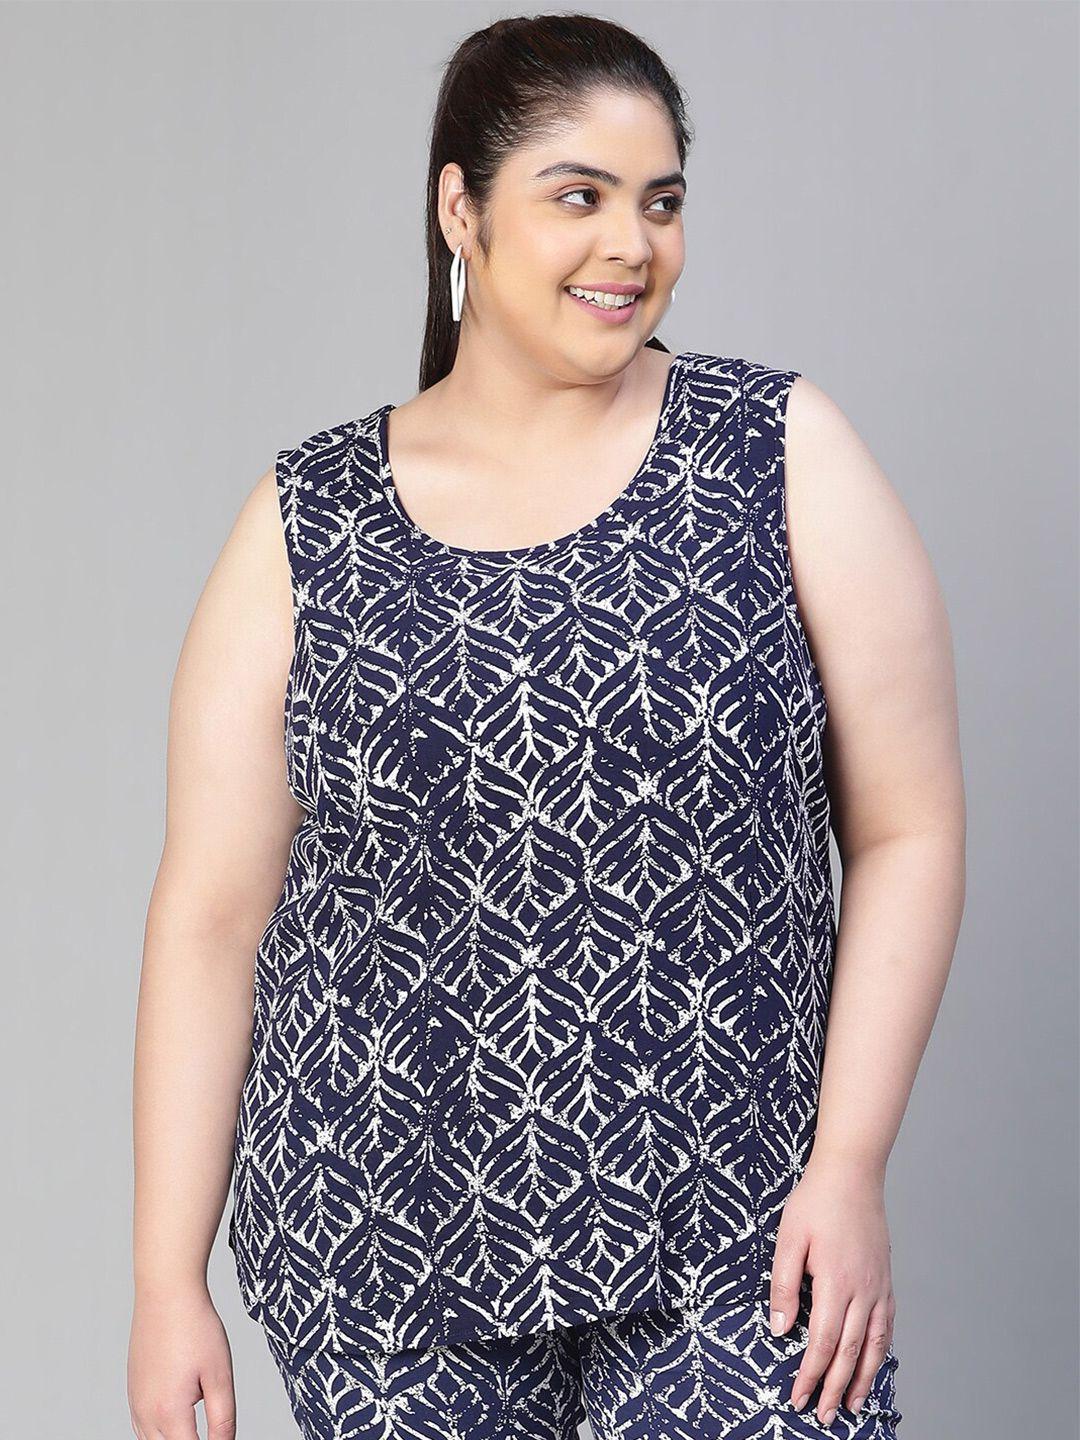 oxolloxo-plus-size-floral-printed-round-neck-top